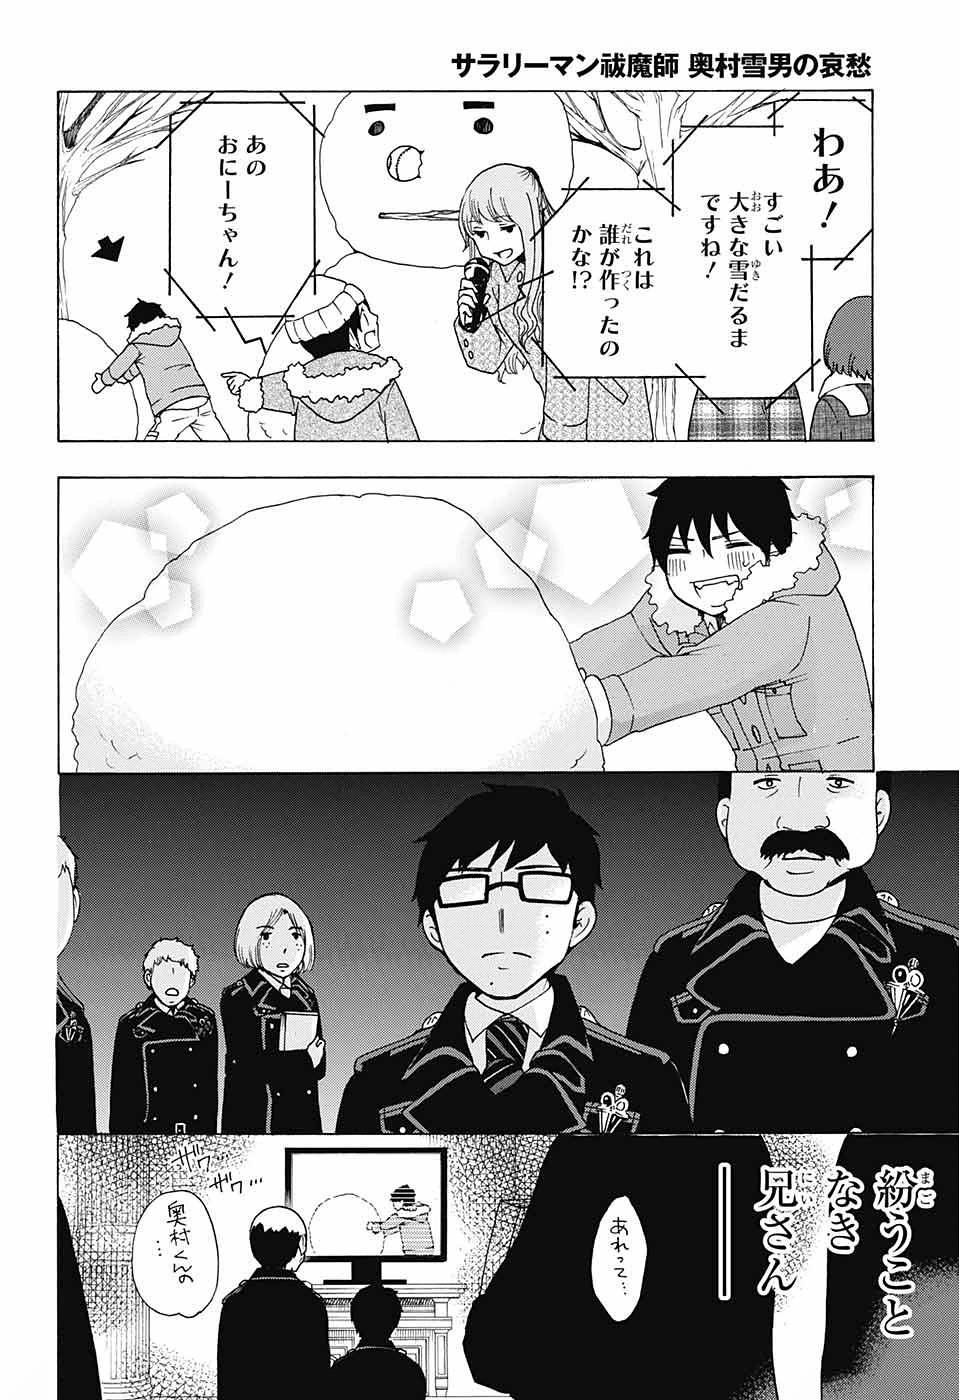 Ao no Exorcist - Chapter 75 - Page 26